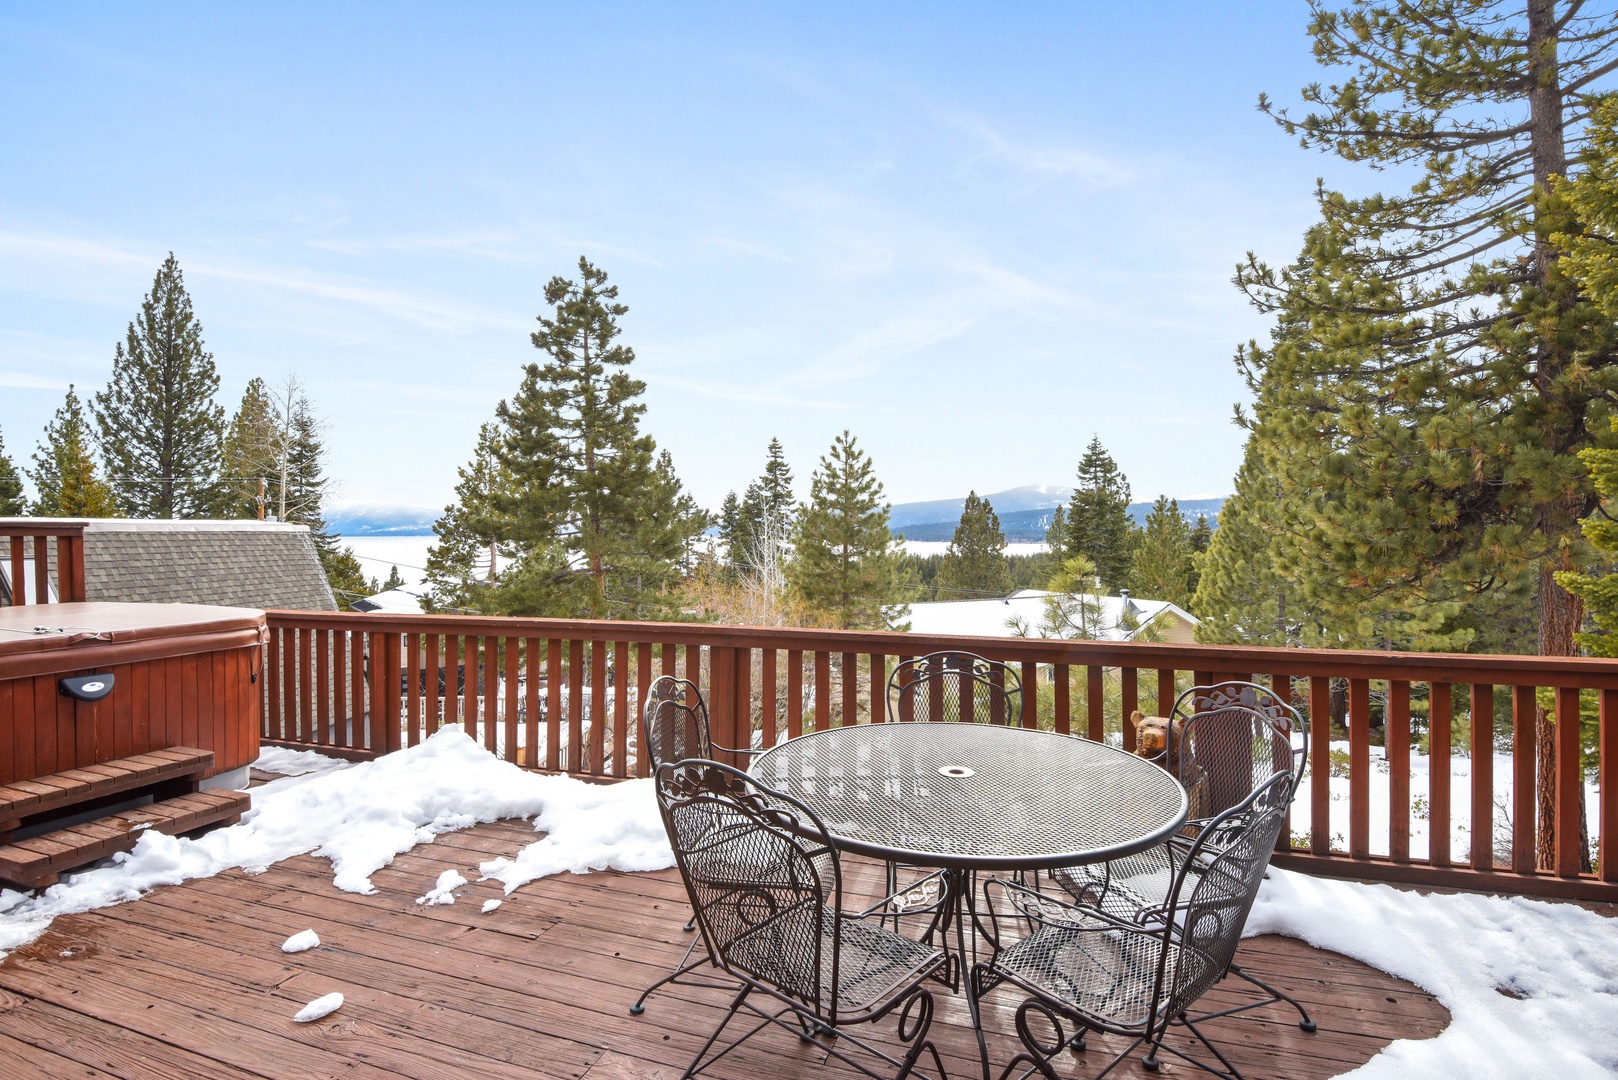 Balcony with private hot tub, outdoor seating, gas BBQ and lake/mountain views